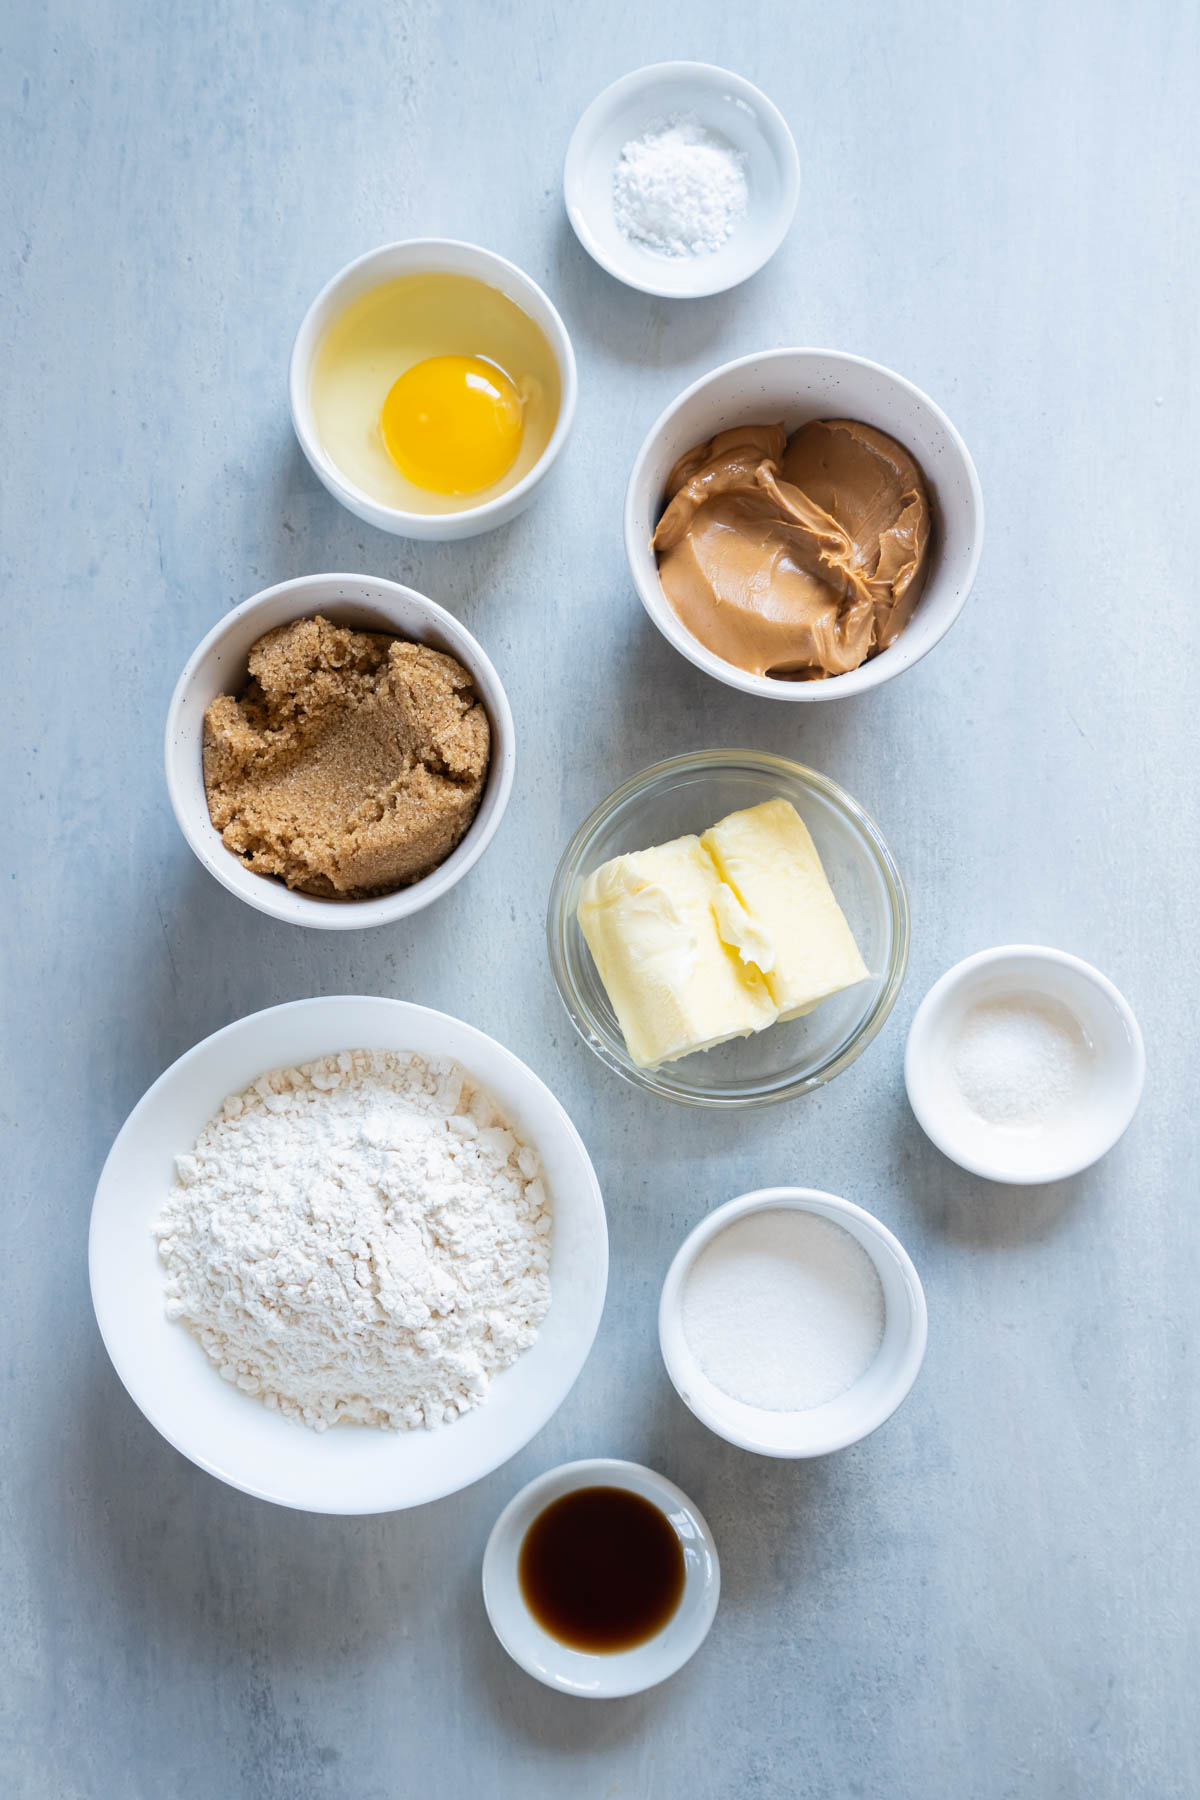 Ingredients for peanut butter cookies recipe.